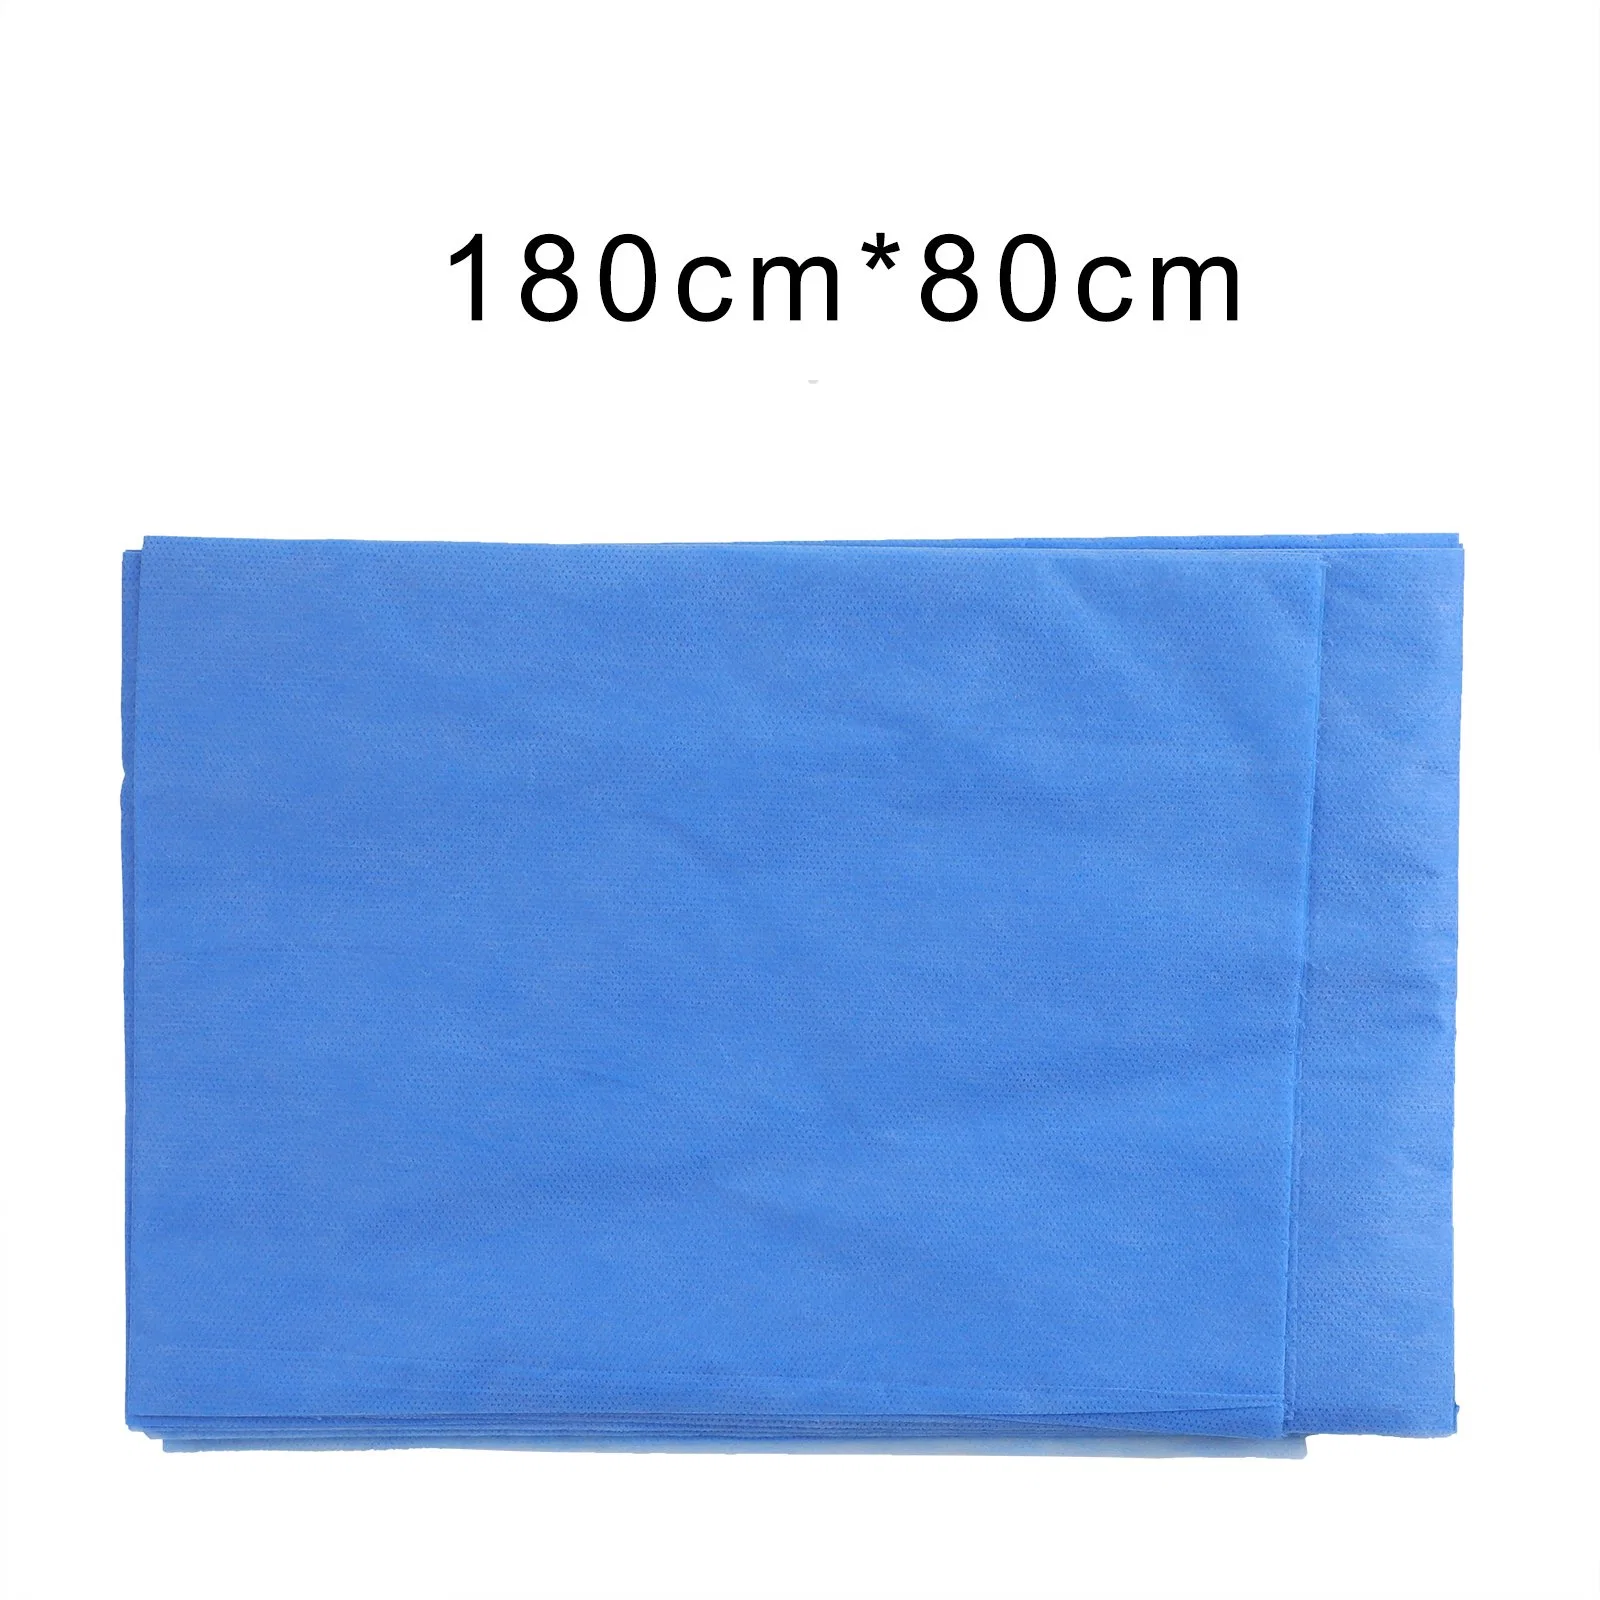 Wholesale Disposable Bed Cover for Tattoo Body Art